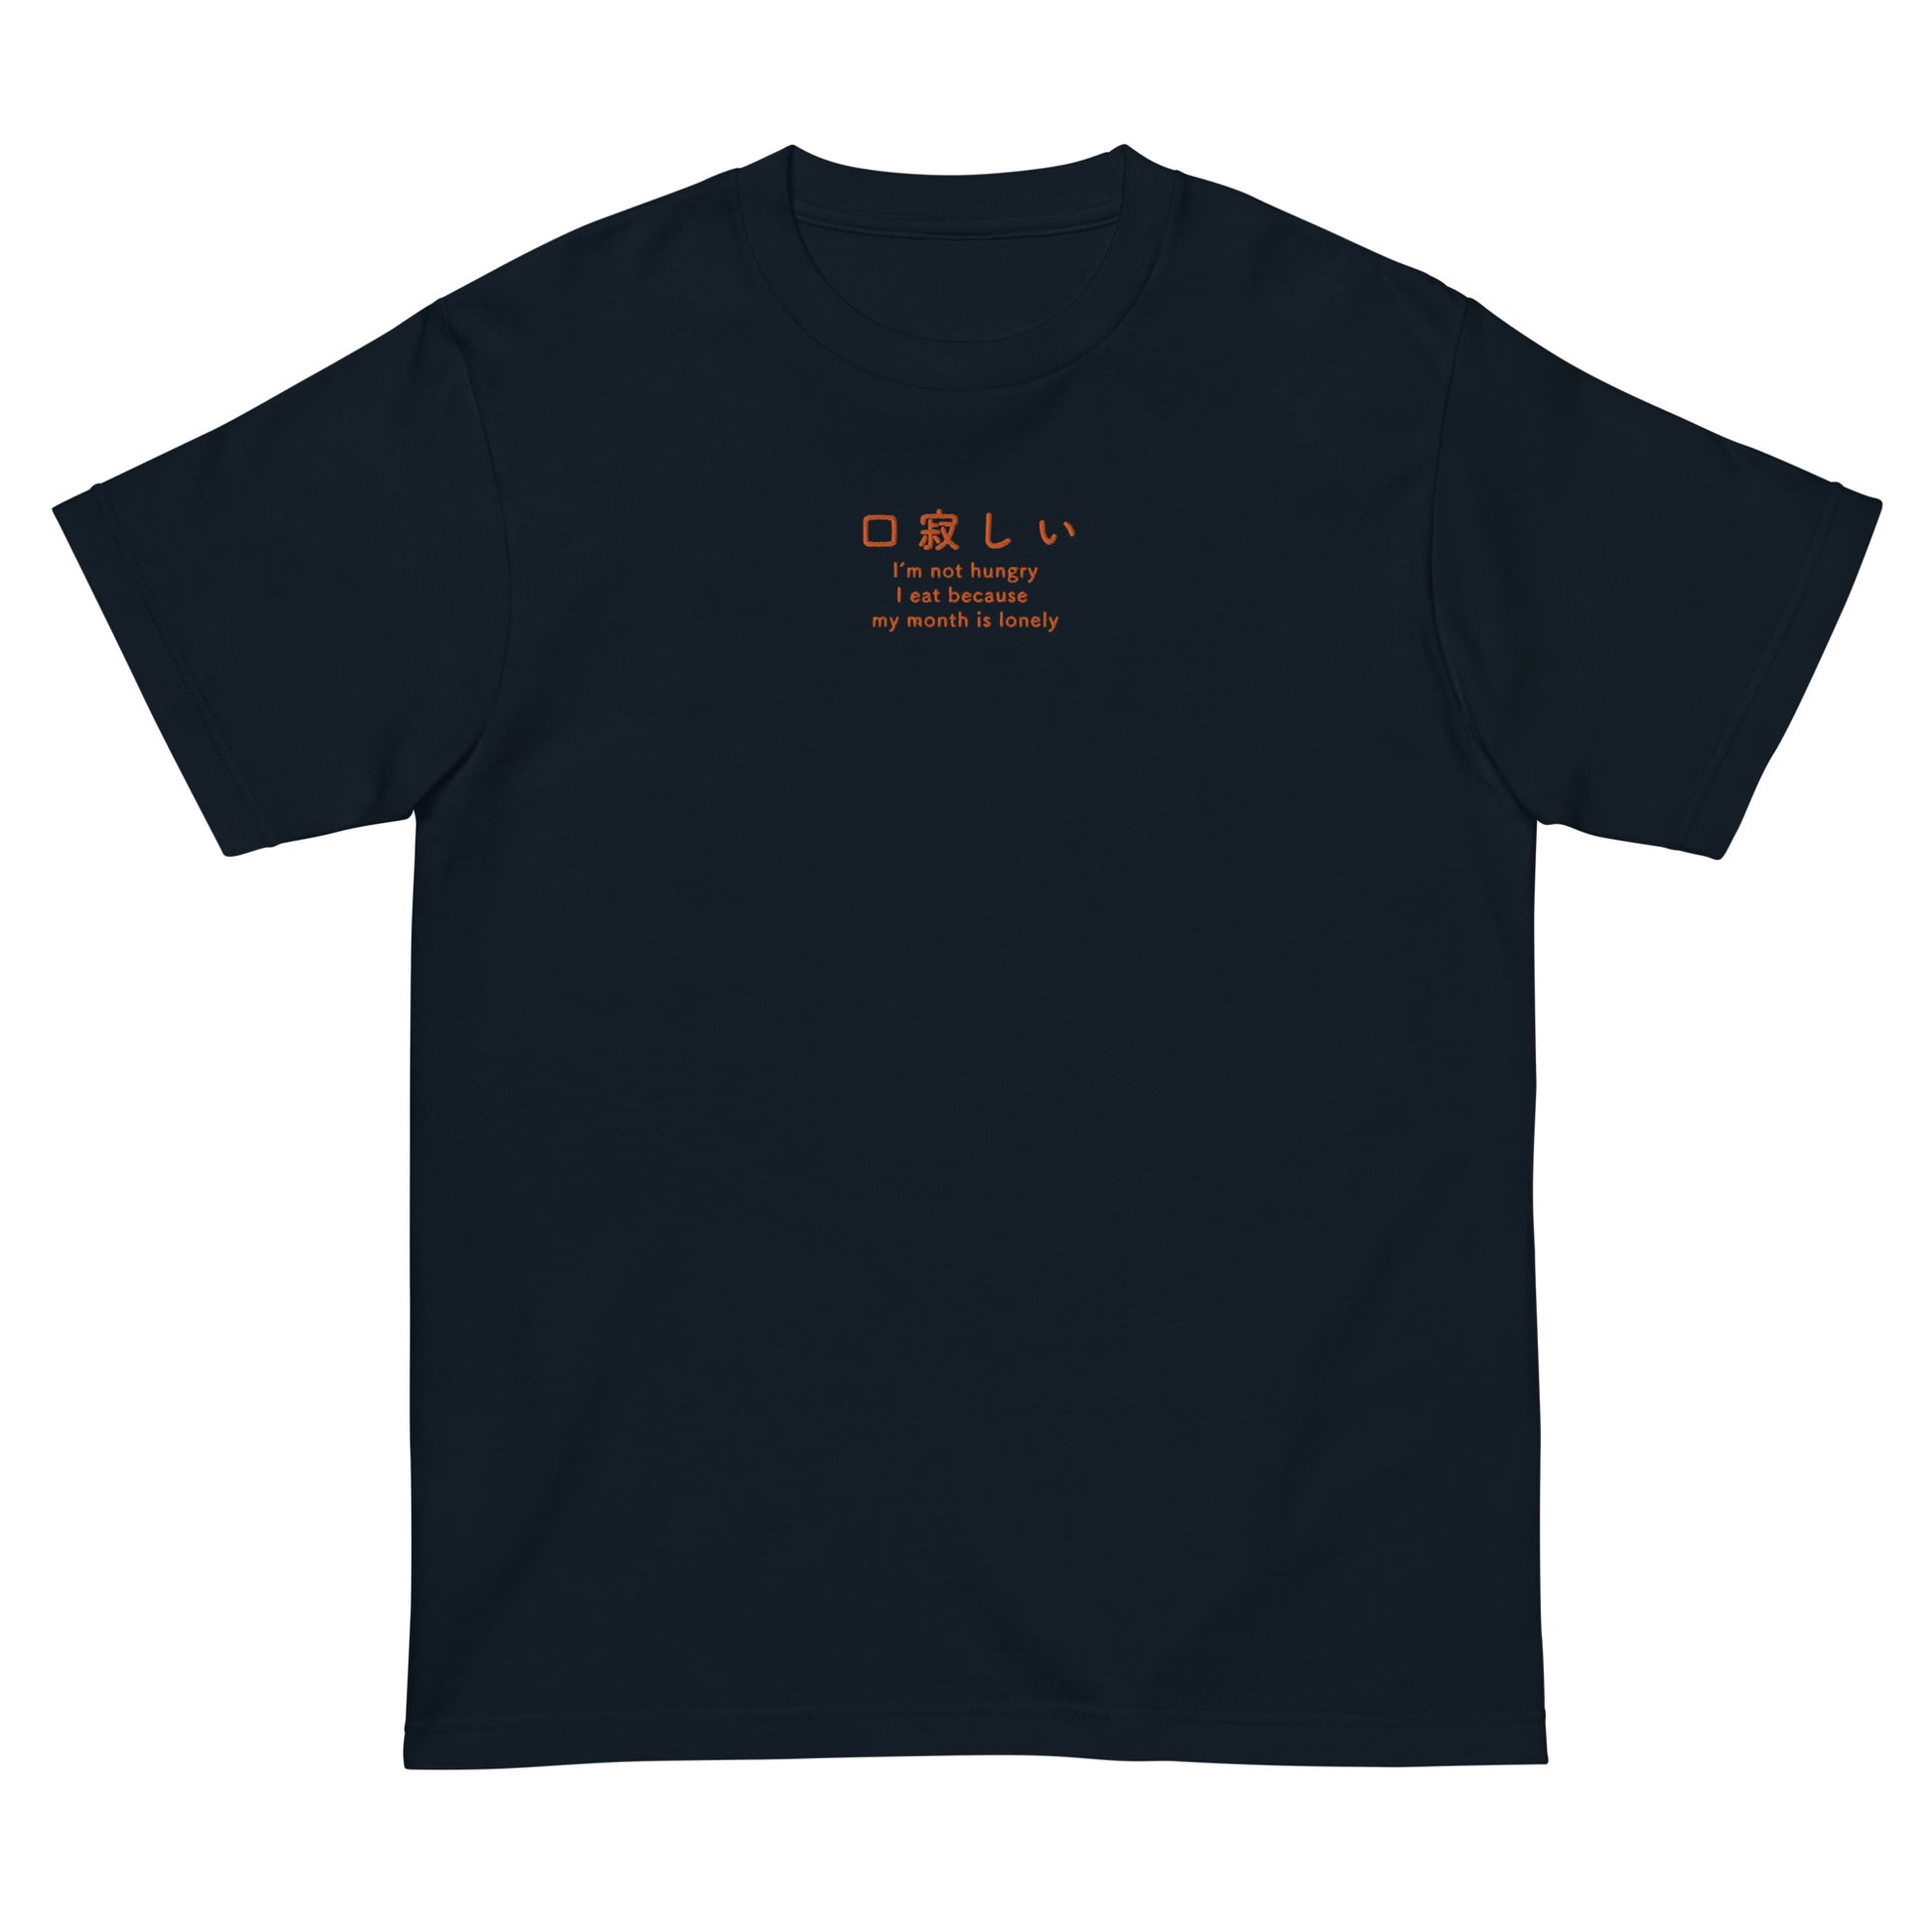 Navy High Quality Tee - Front Design with an Orange Embroidery "kuchisabishi" in Japanese and English